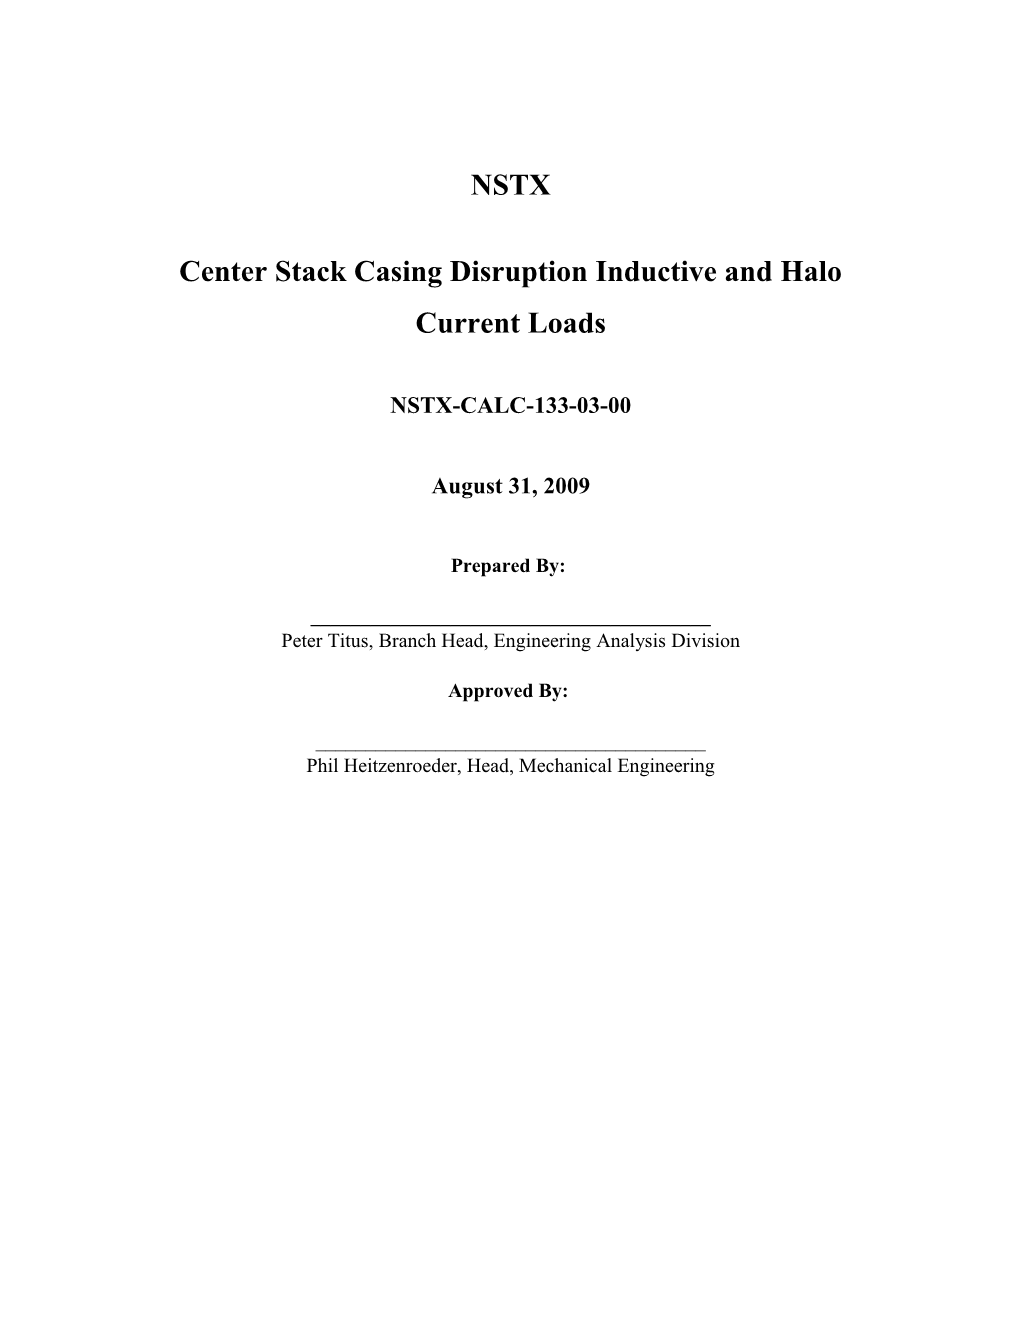 Center Stack Casing Disruption Inductive and Halo Current Loads